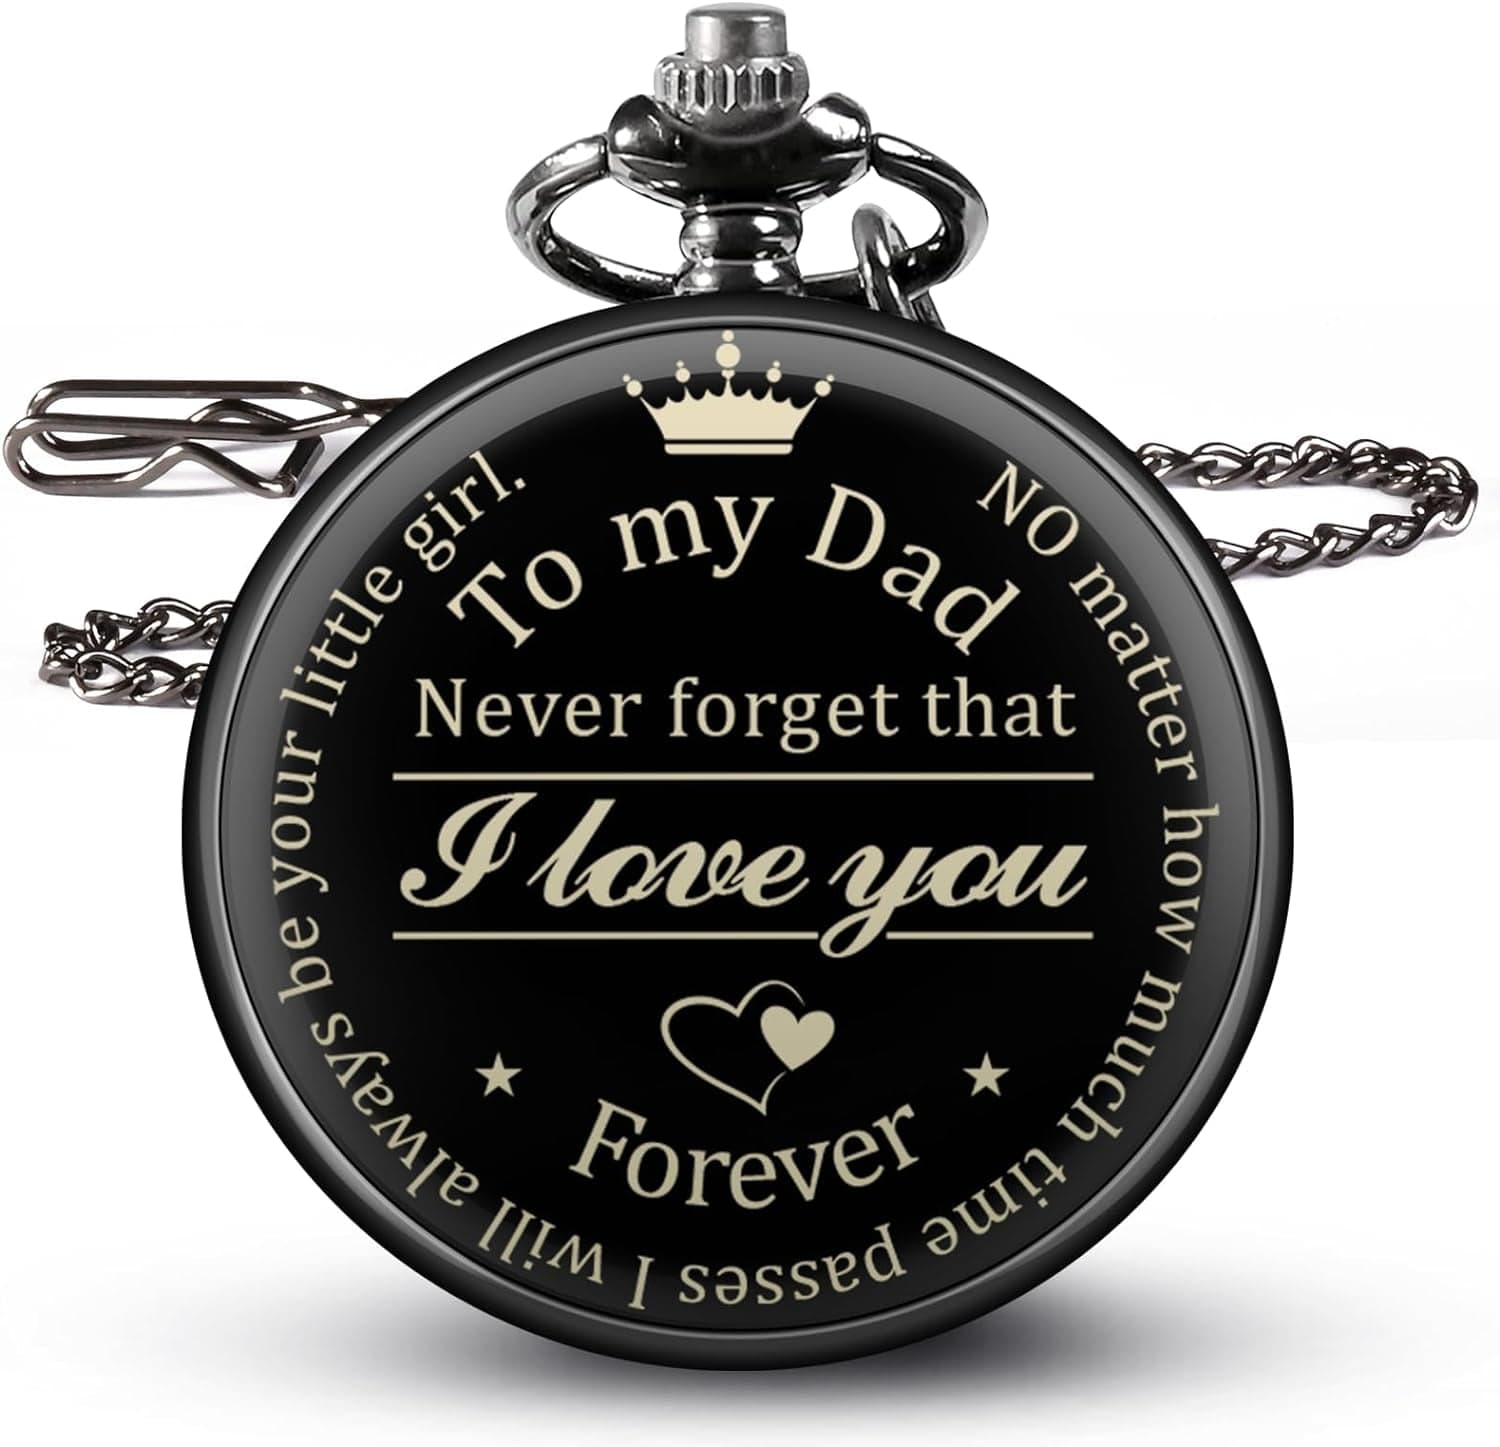 GeckoCustom Fathers Day Dad Gifts from Daughter Son, Birthday Gifts for Dad Grandpa Husband Step Dad Personalized Pocket Watch with Chain Dad